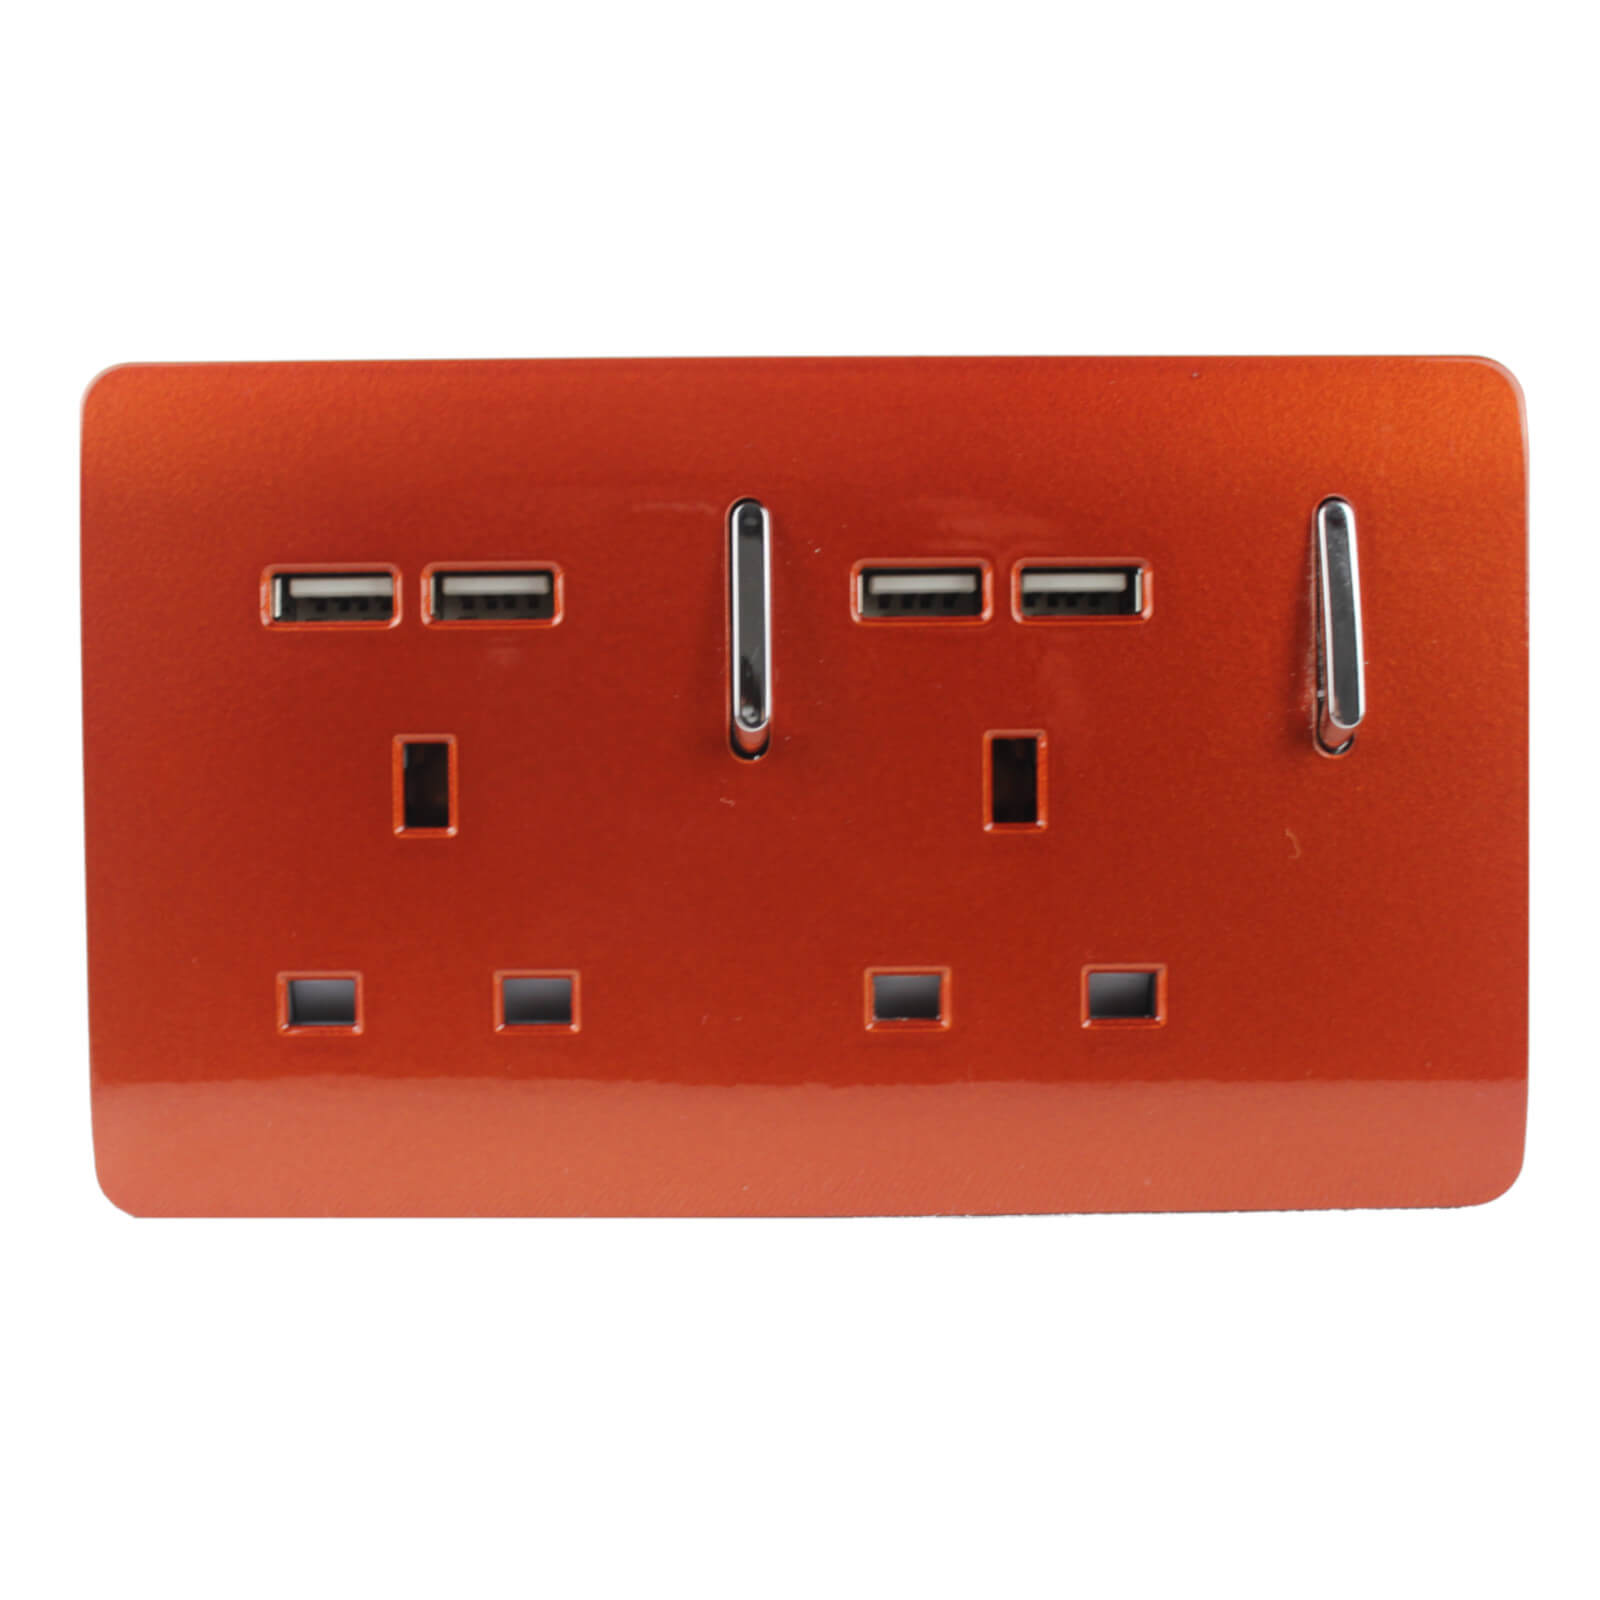 Trendi Switch 2 Gang 13A Short Switched Plug USB Socket in Screwless Copper